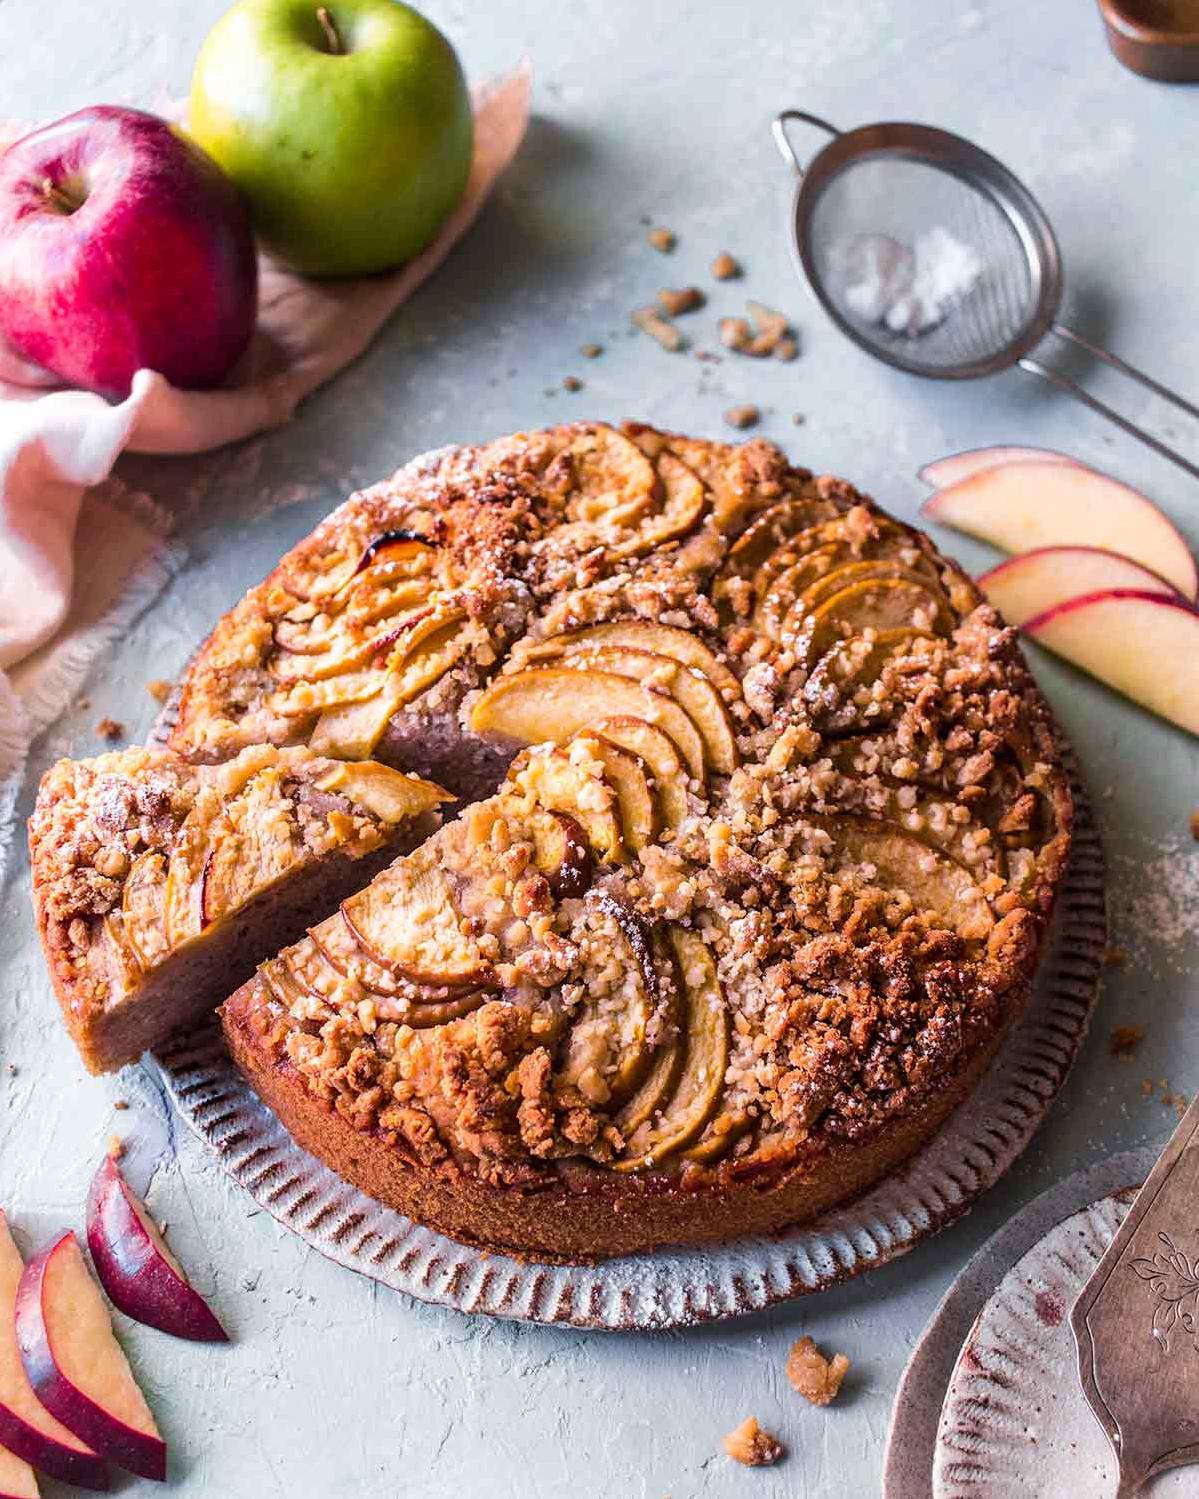  The aromatic combination of cinnamon, nutmeg, and apples makes this Pecan Apple Strudel Cake a true comfort food.